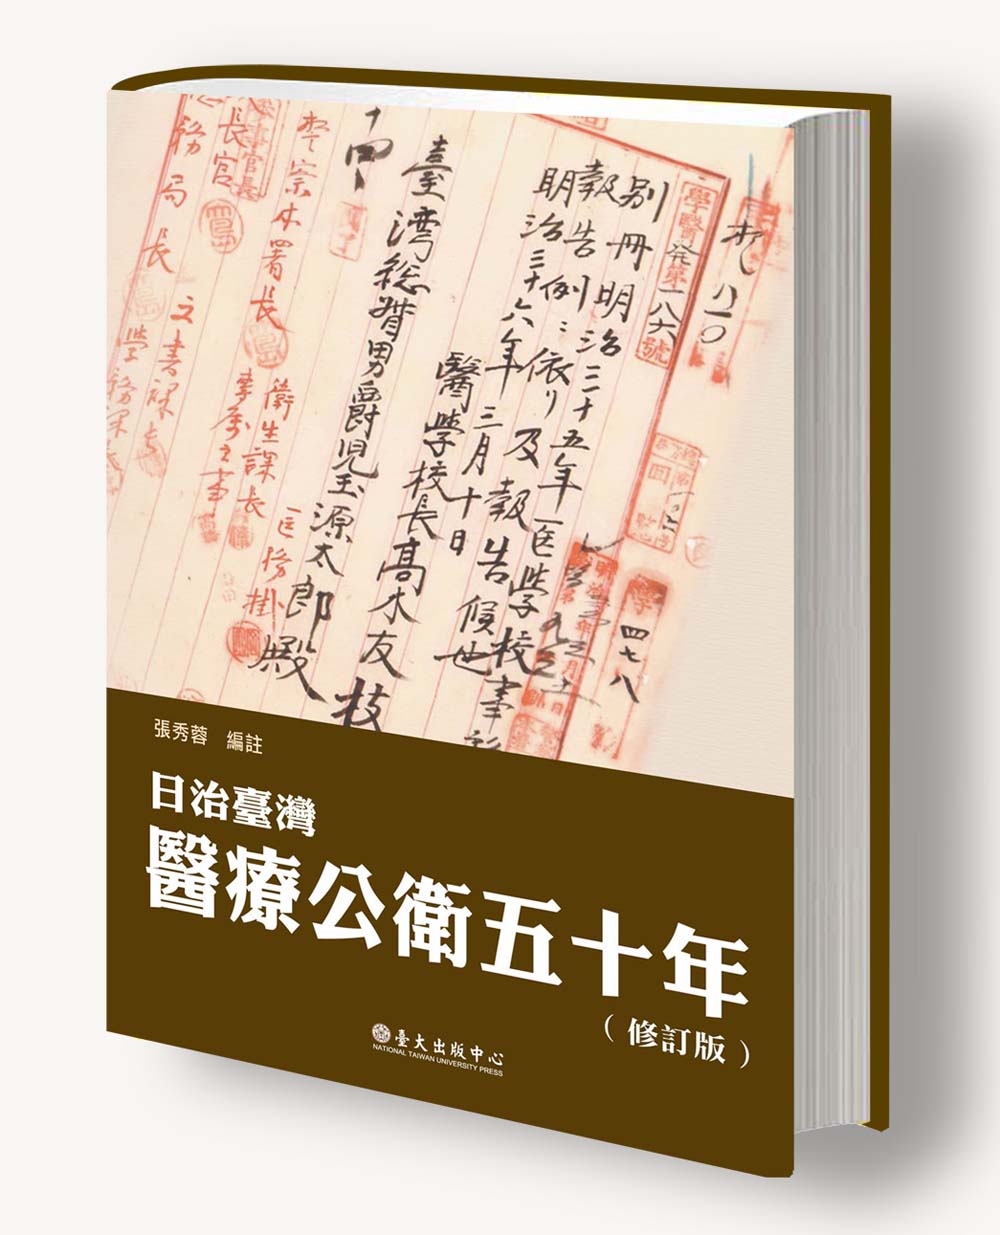 50 Years of Advancement: A Collection of Taiwan’s Medical and Public Health Records under the Japanese Colonial Rule   （Second Edition）